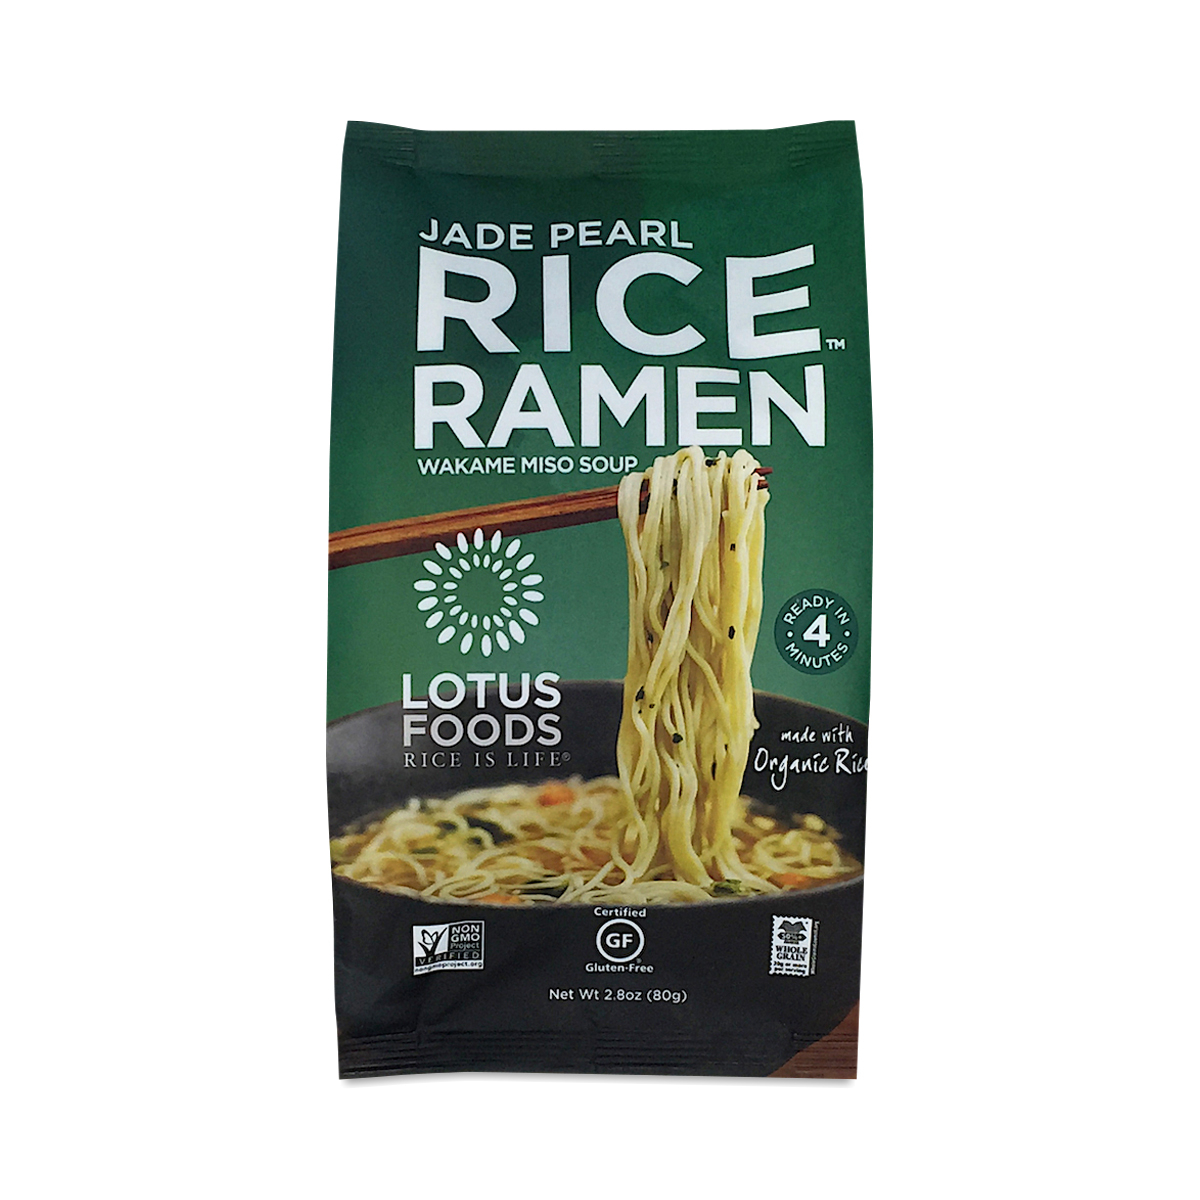 Lotus Foods Organic Jade Pearl Rice Ramen with Miso Soup 2.8 oz pouch